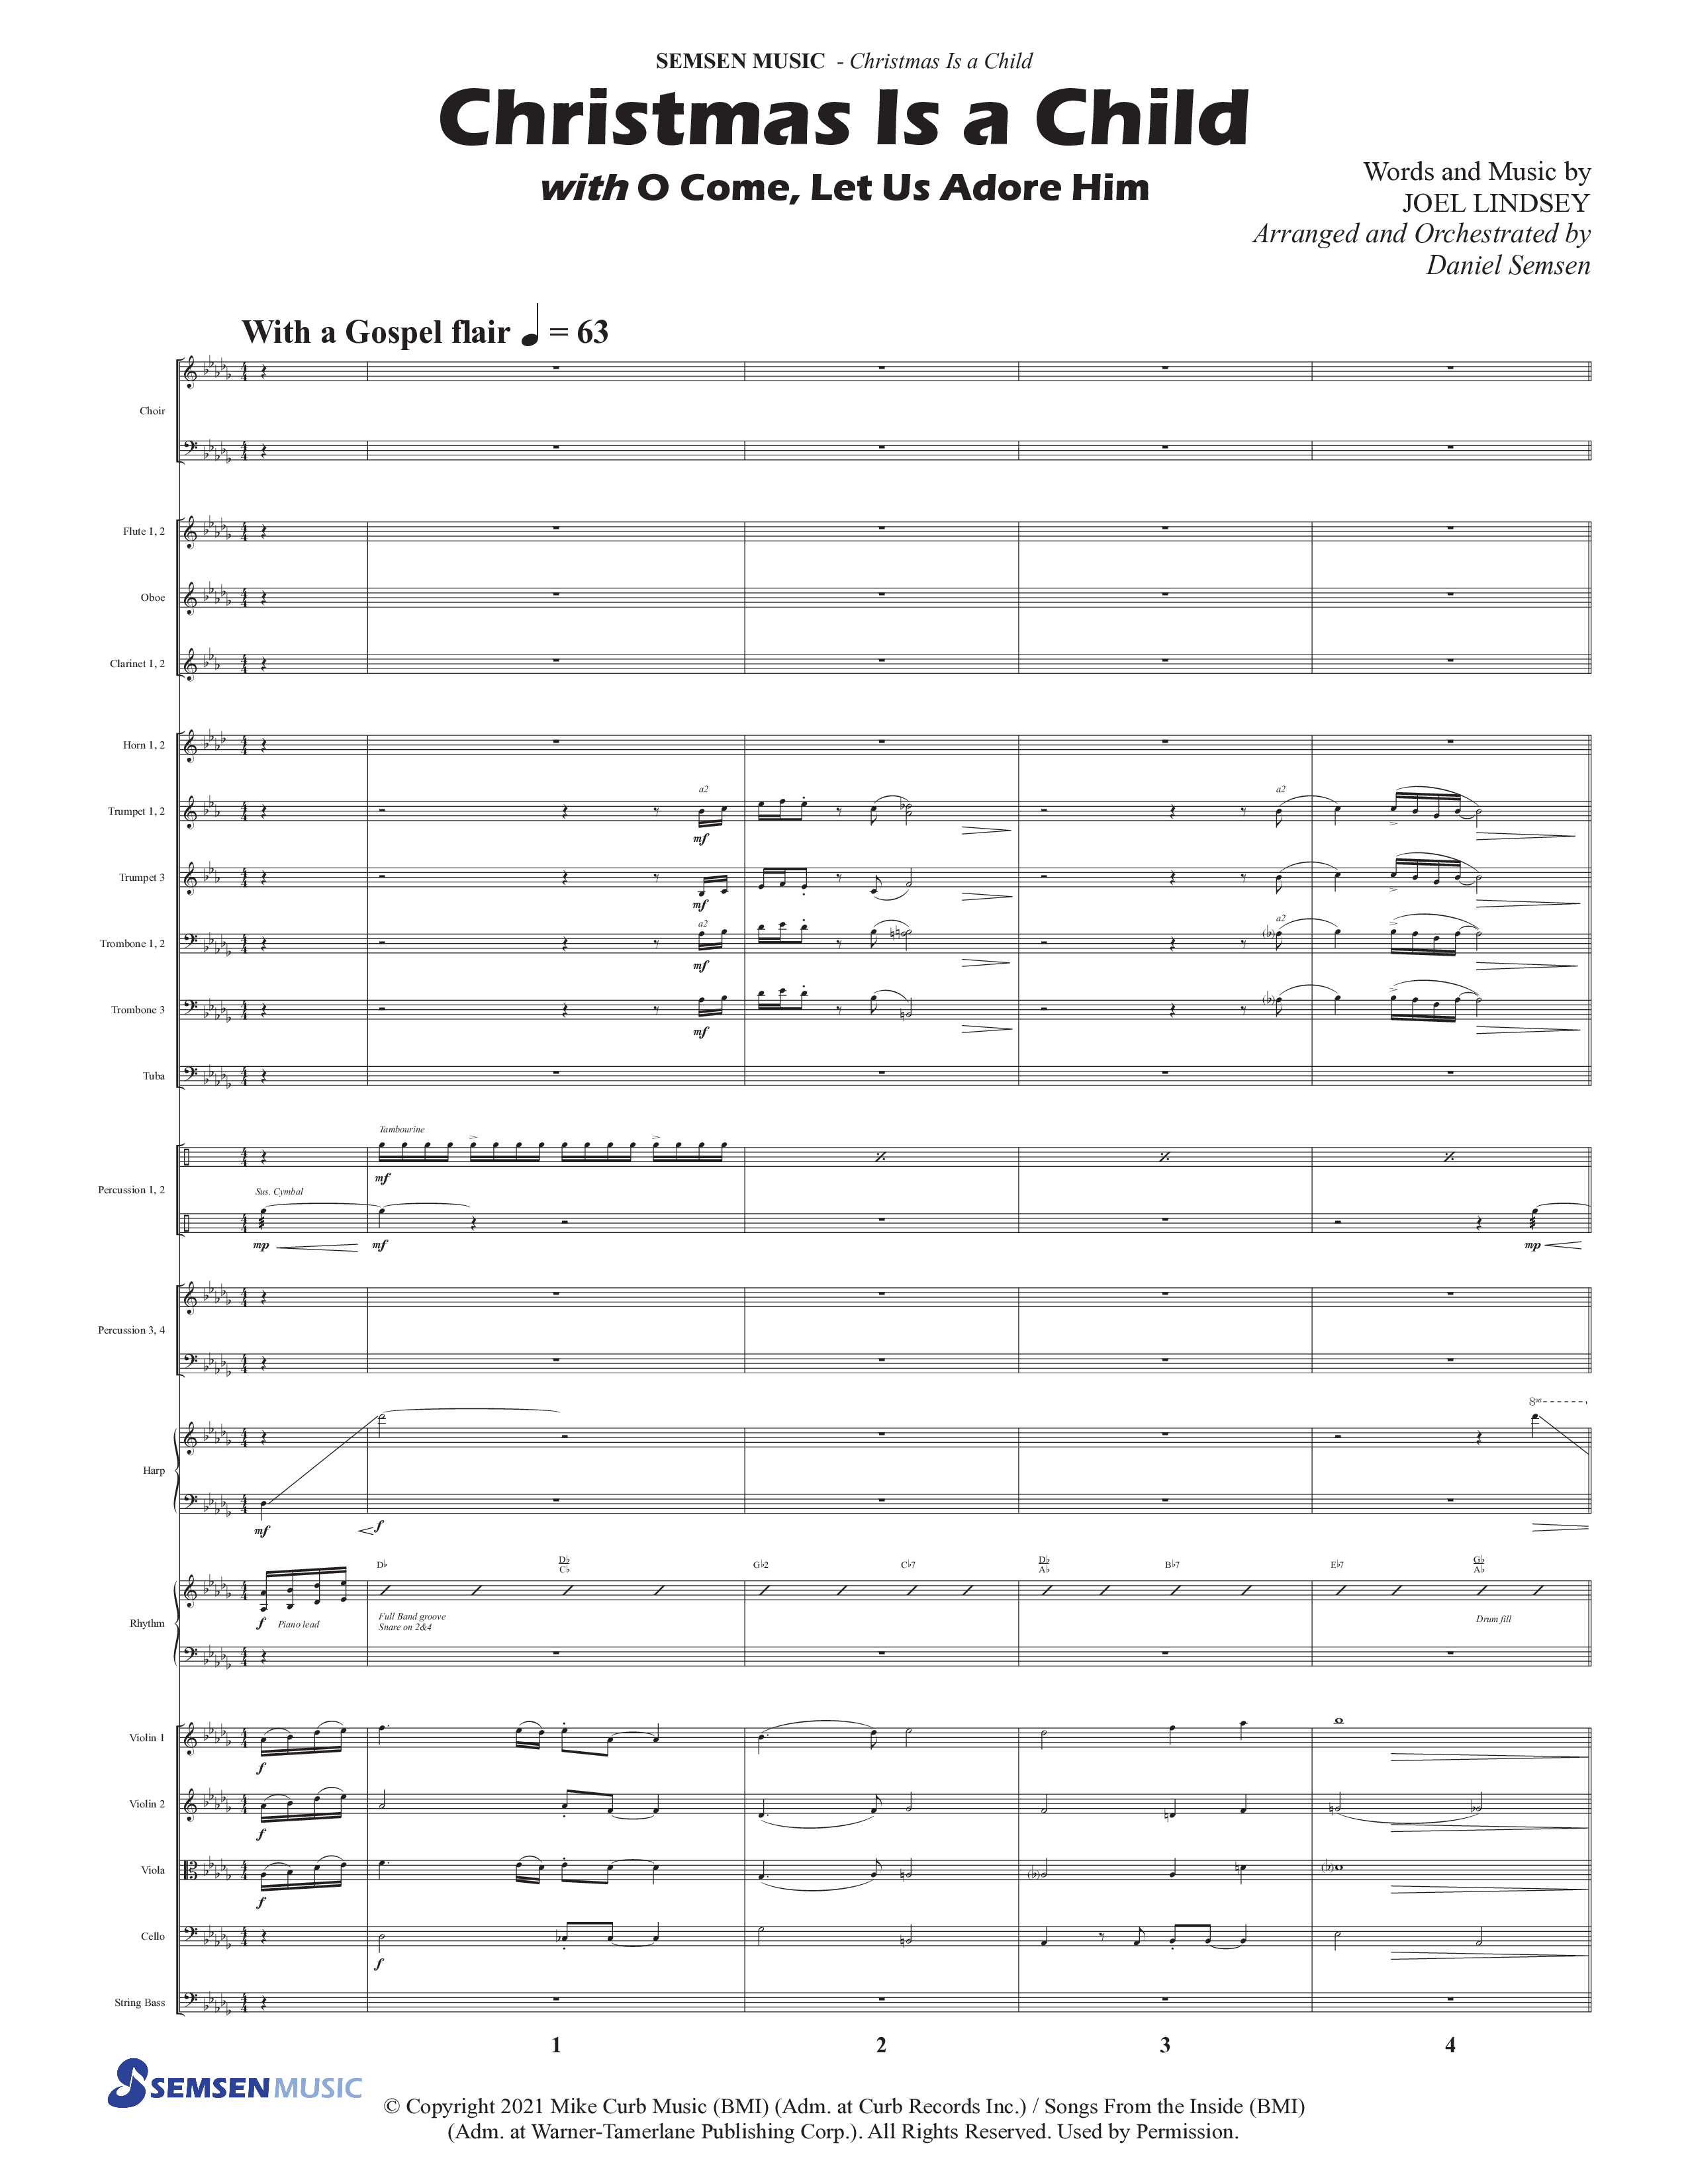 Christmas Is A Child (5 Song Choral Collection) Song 4 (Orchestration) (Semsen Music / Arr. Daniel Semsen)